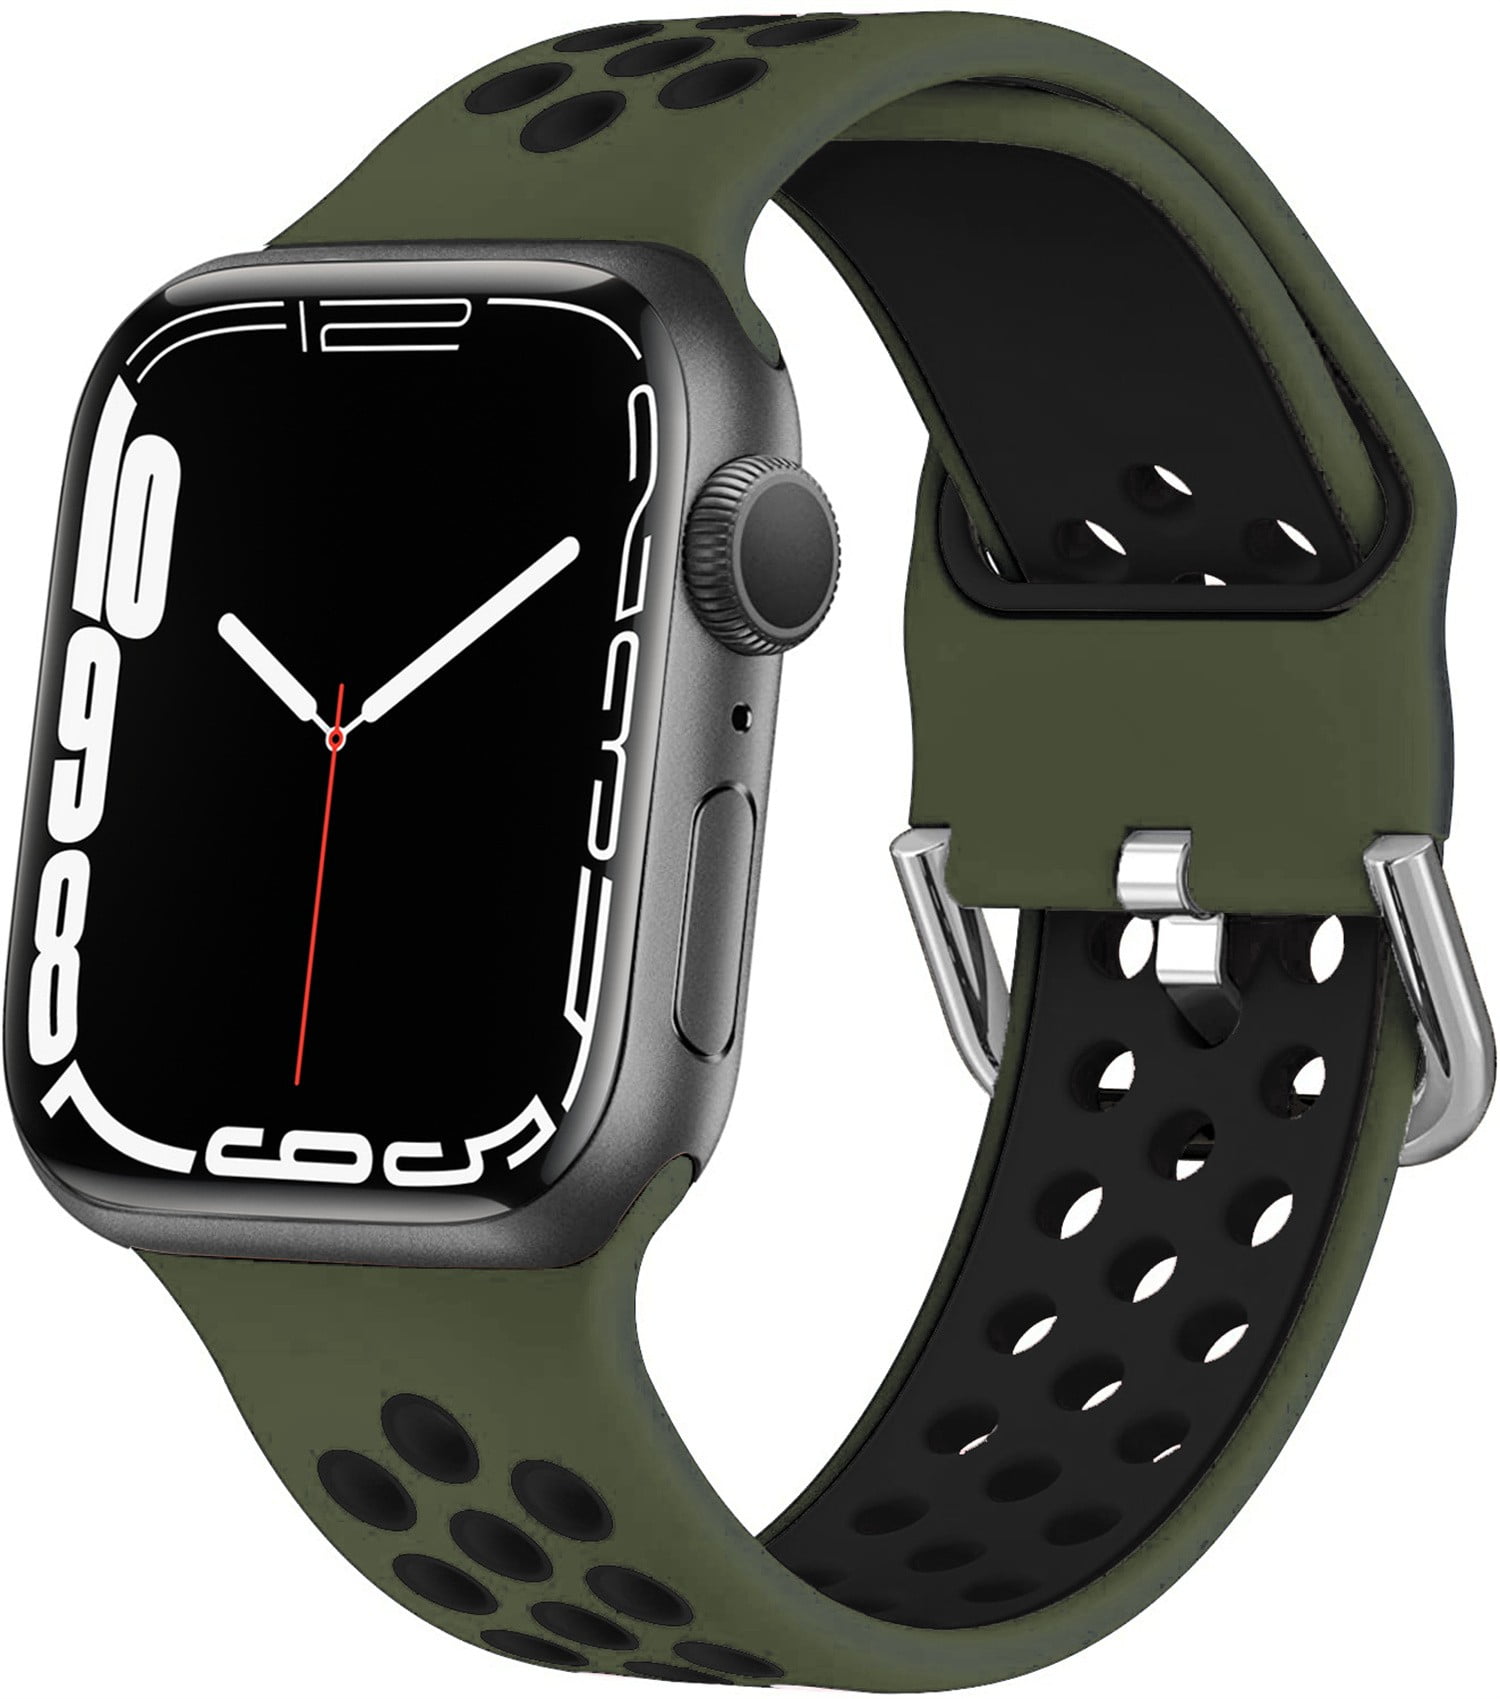 Valiente Corroer Torneado Sport Silicone Strap for Apple Watch Band 38mm 42mm 40mm 44mm 41mm  45mm,Smartwatch Wristbands Adjustable Breathable Sport Bands for iWatch  Series 7 6 5 4 3 2 1 SE nike - gray black-black - Walmart.com